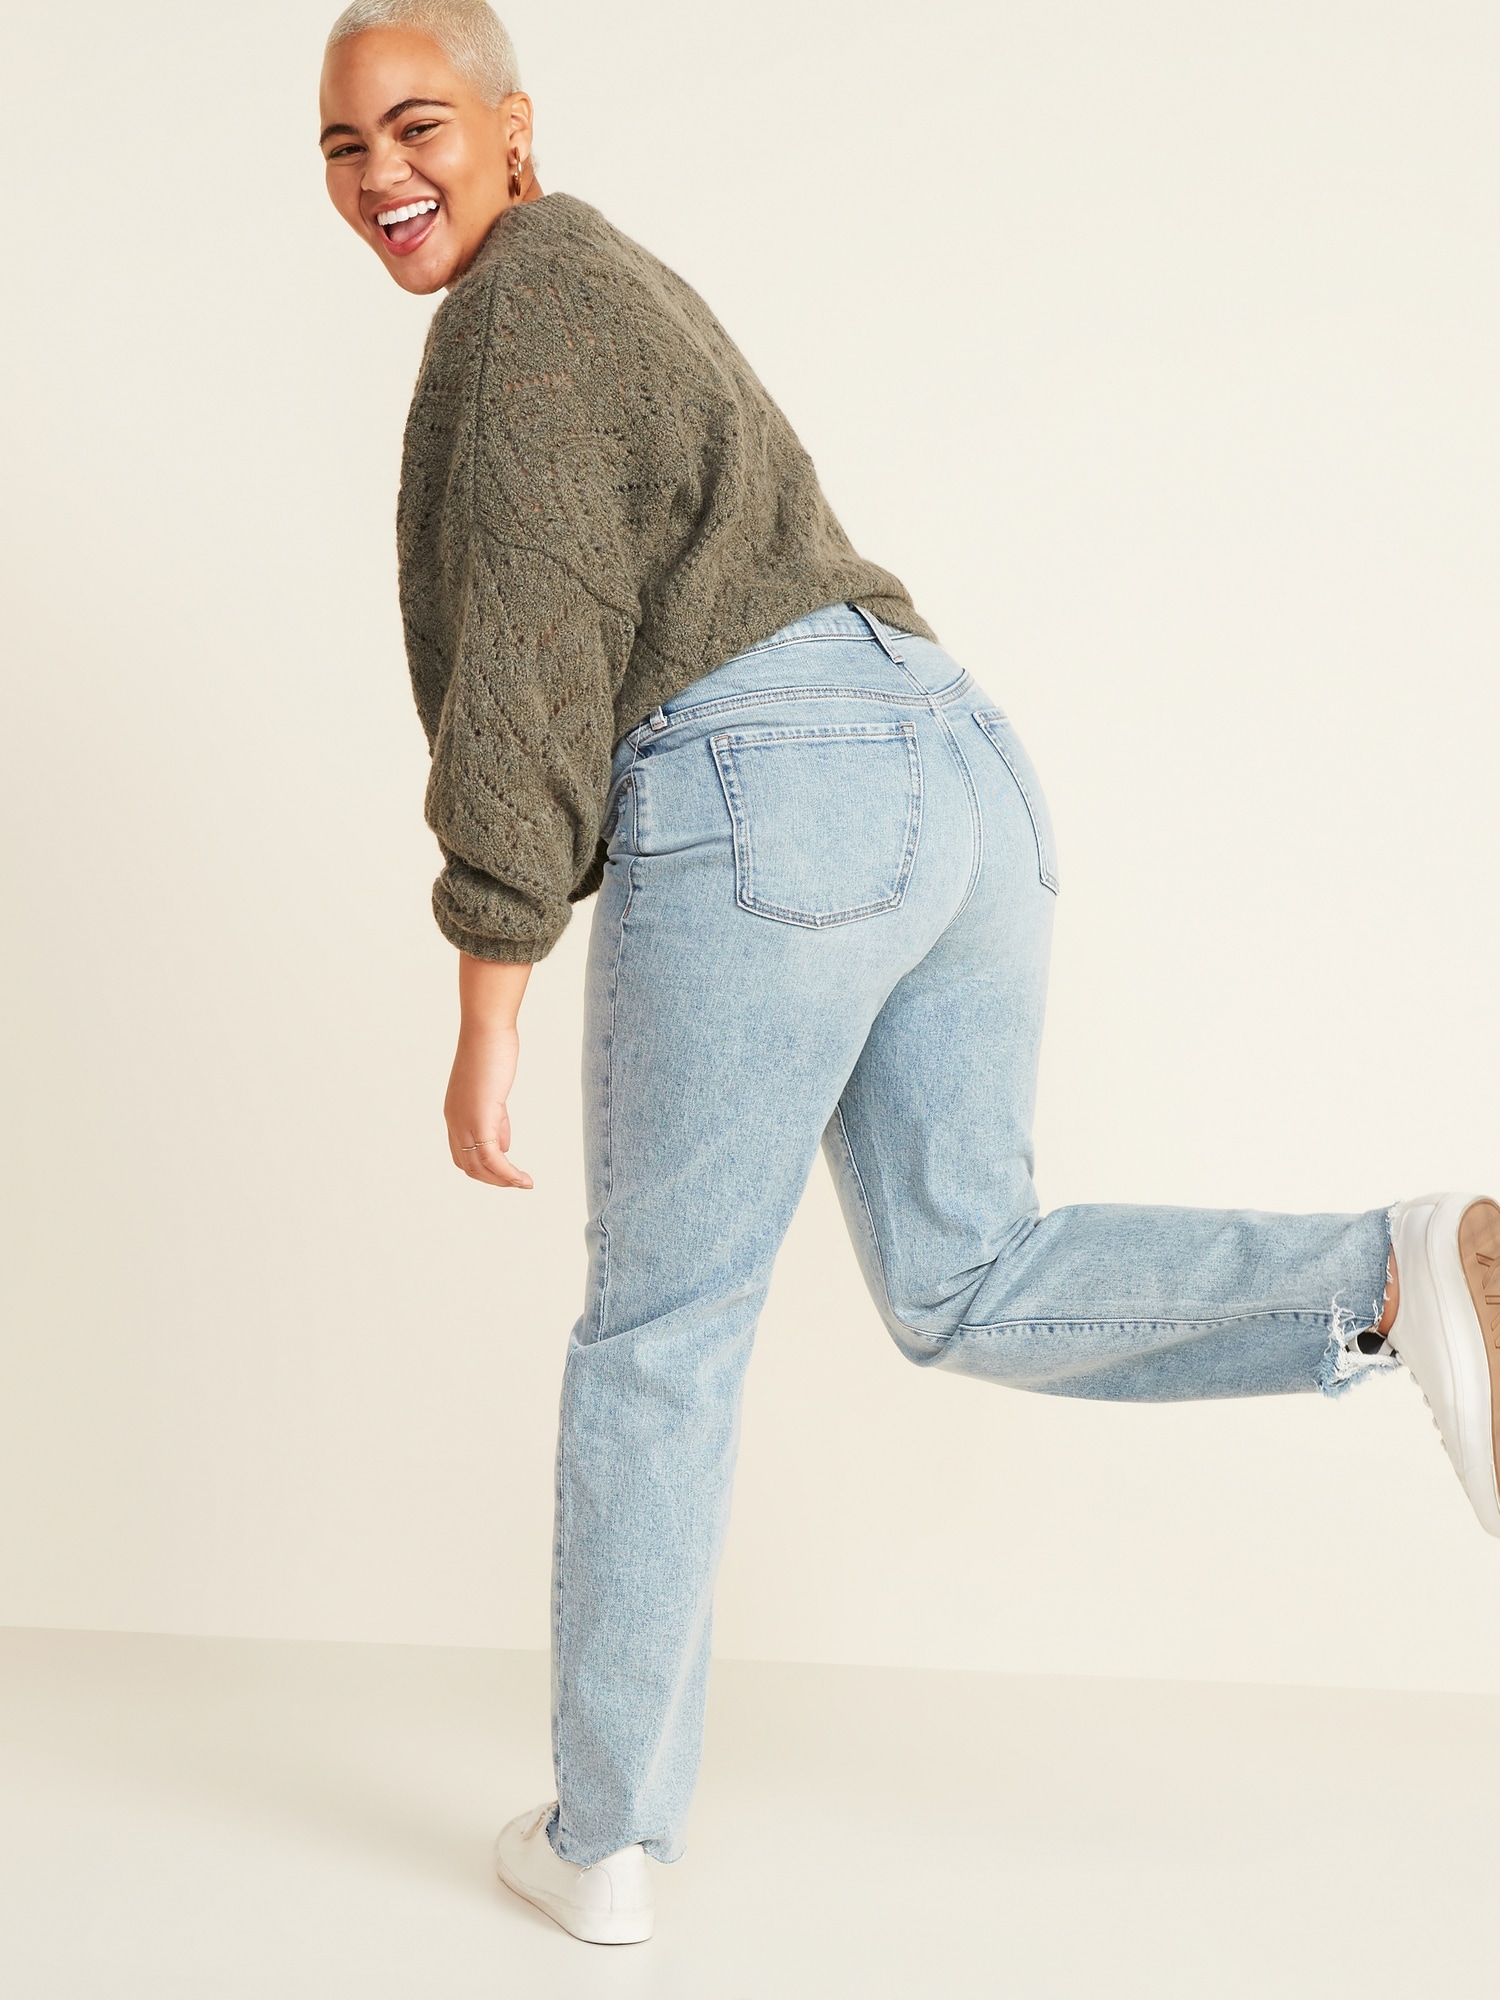 old navy high waisted mom jeans